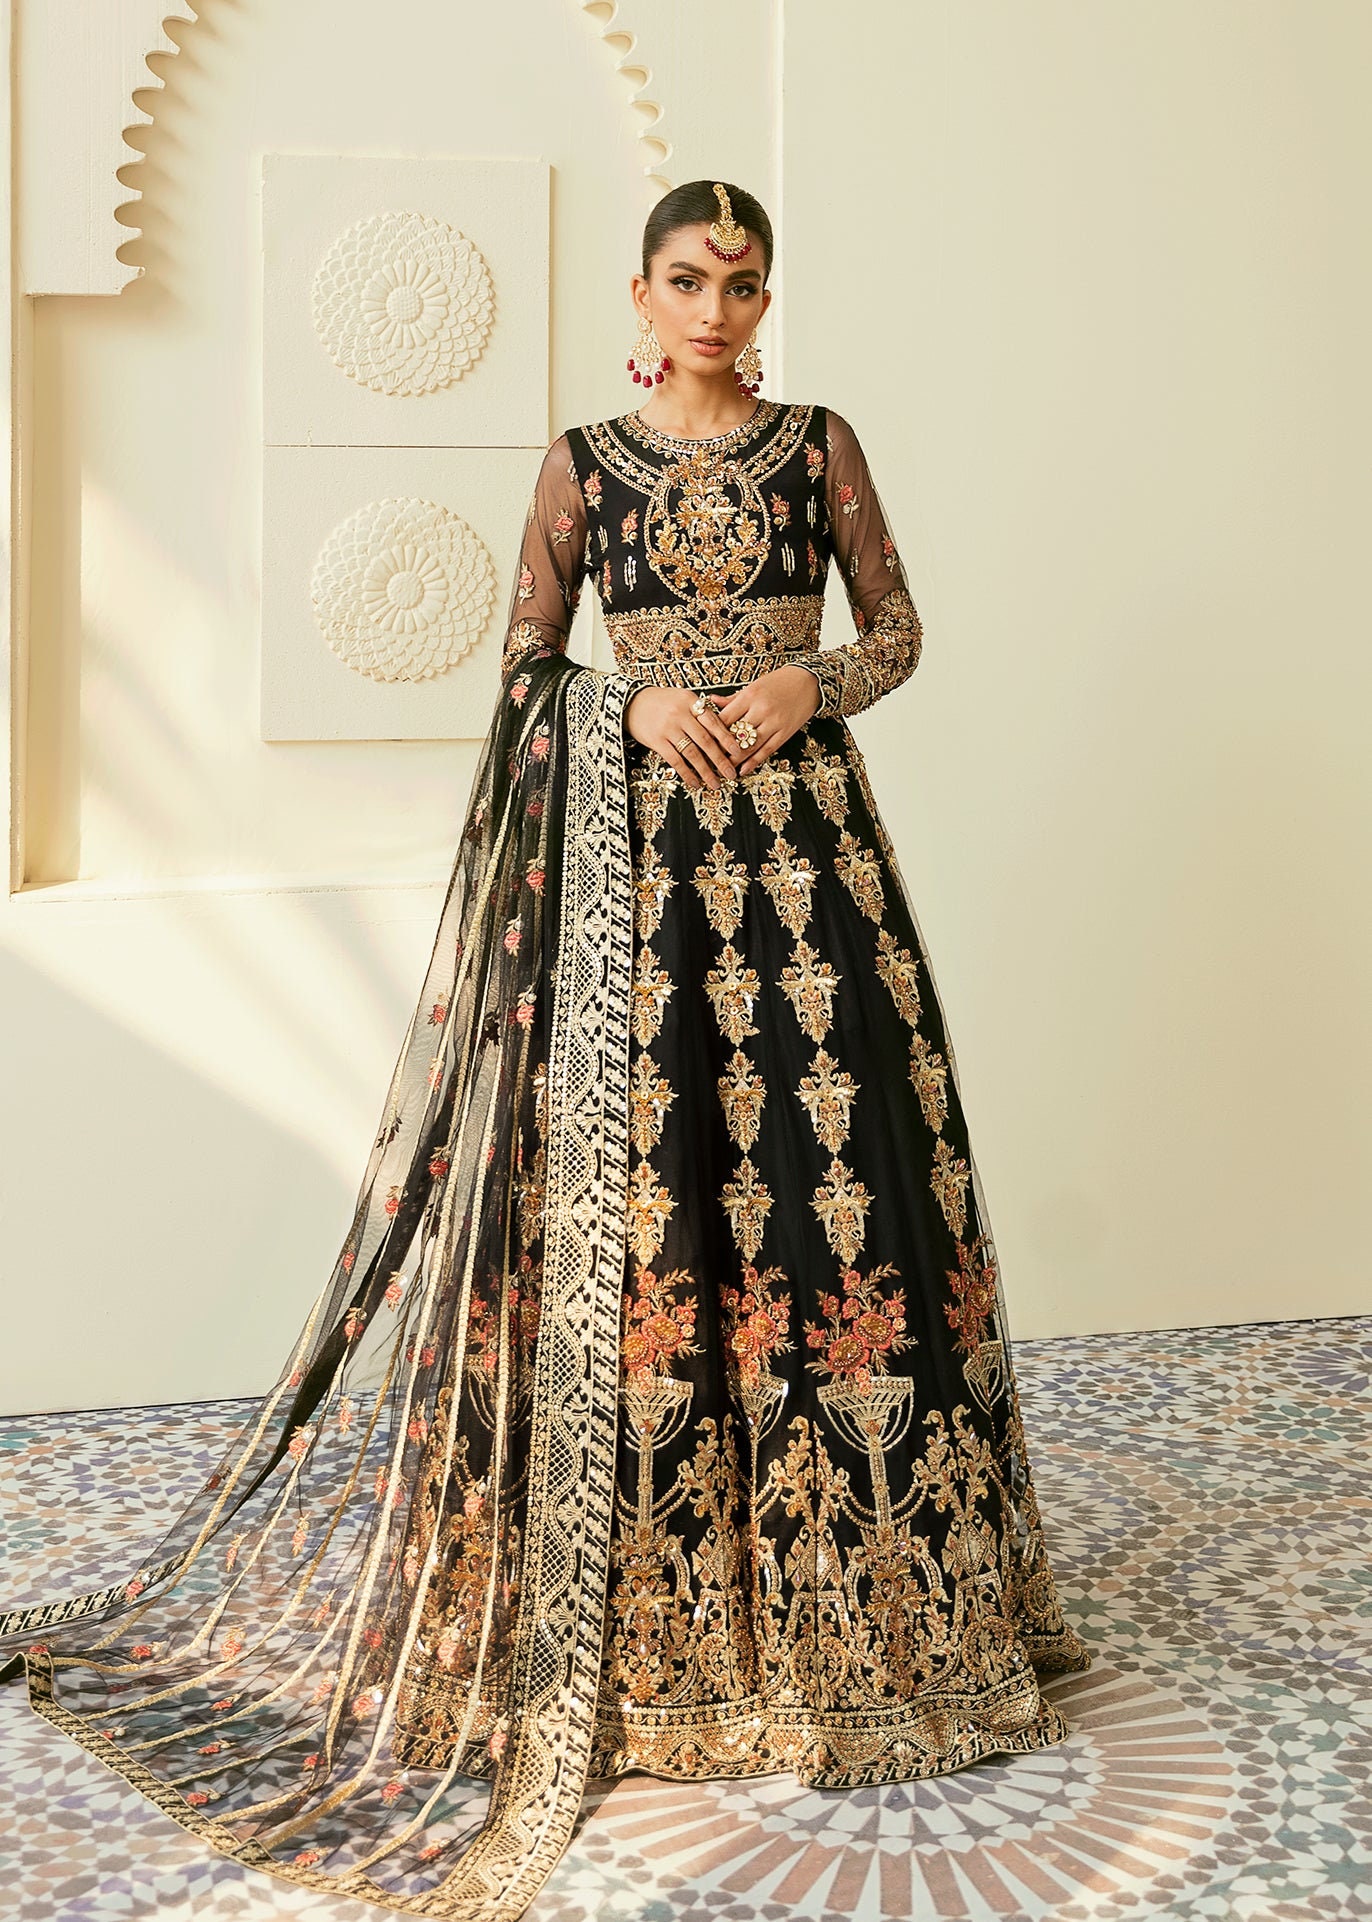 Buy Gowns Online India | Indian Gowns Online - Sarees Palace